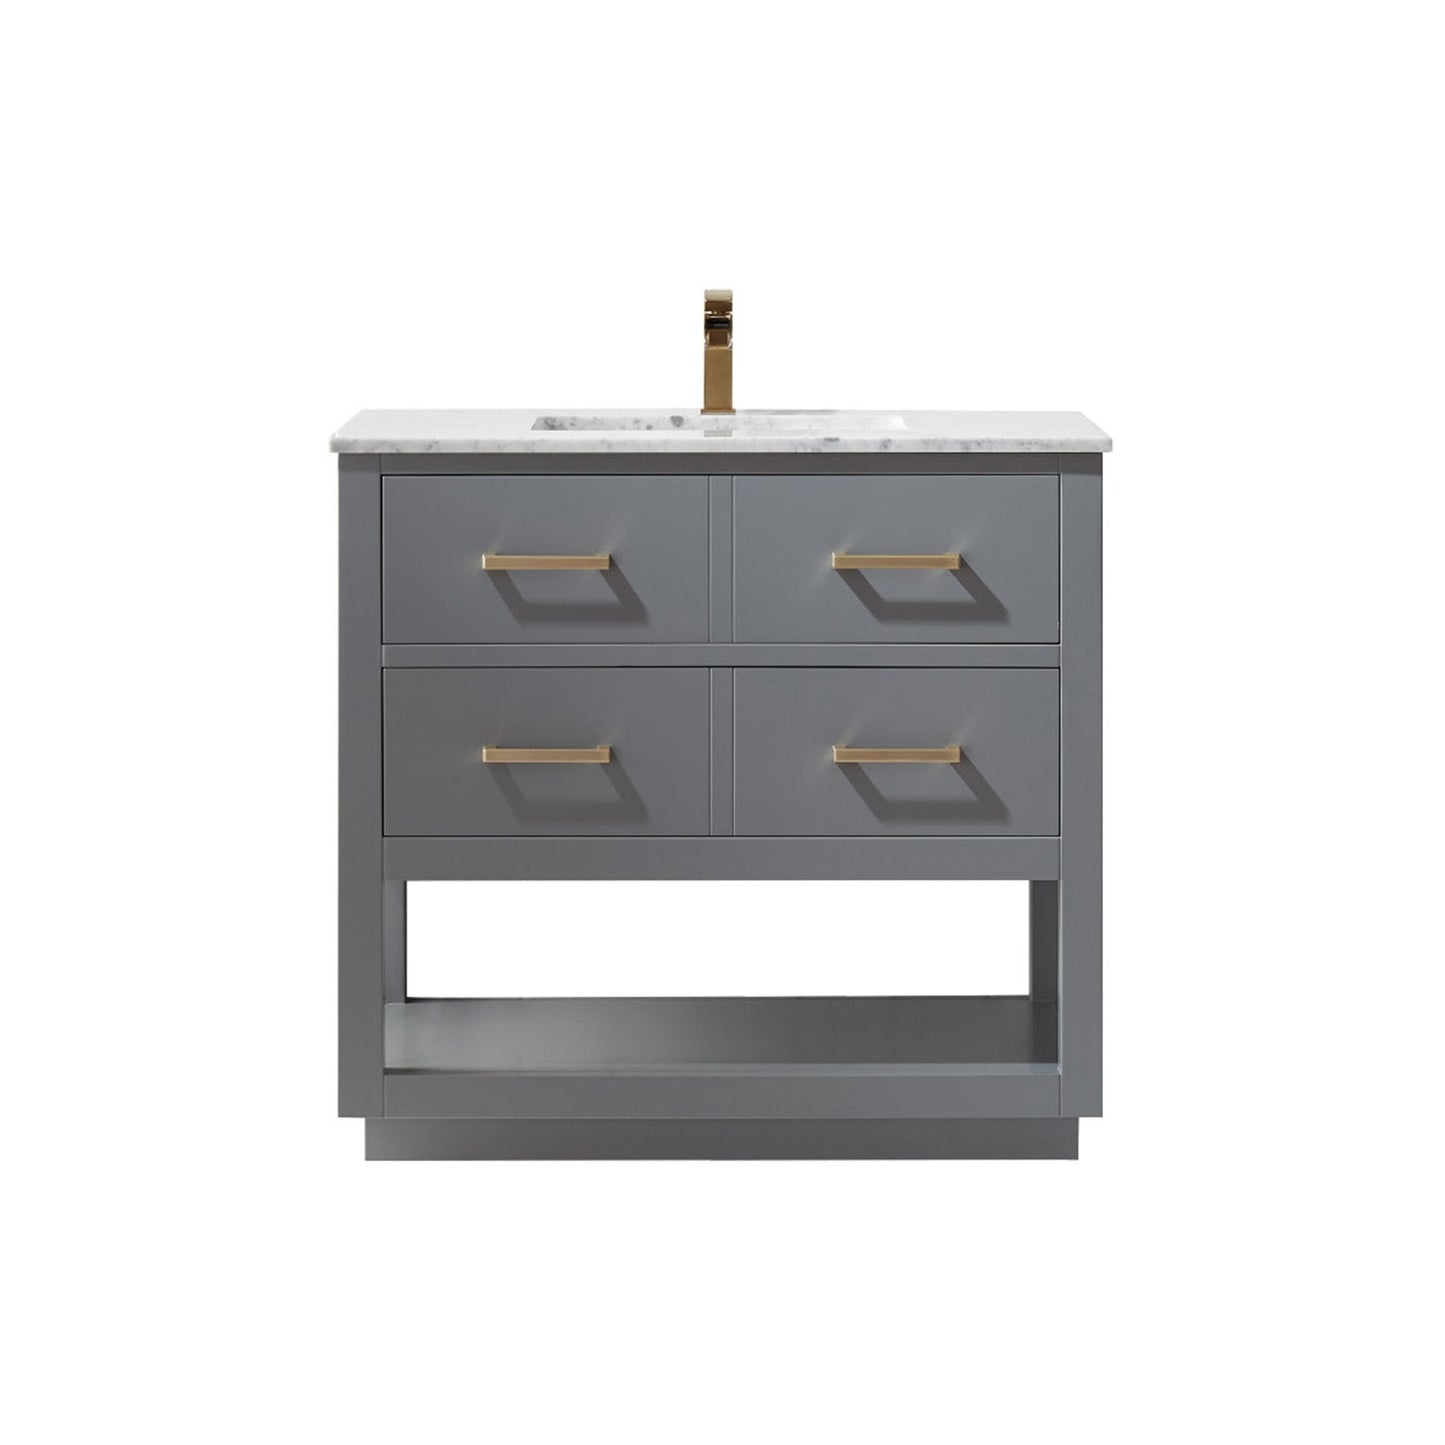 Remi 36" Single Bathroom Vanity Set in Gray and Carrara White Marble Countertop without Mirror